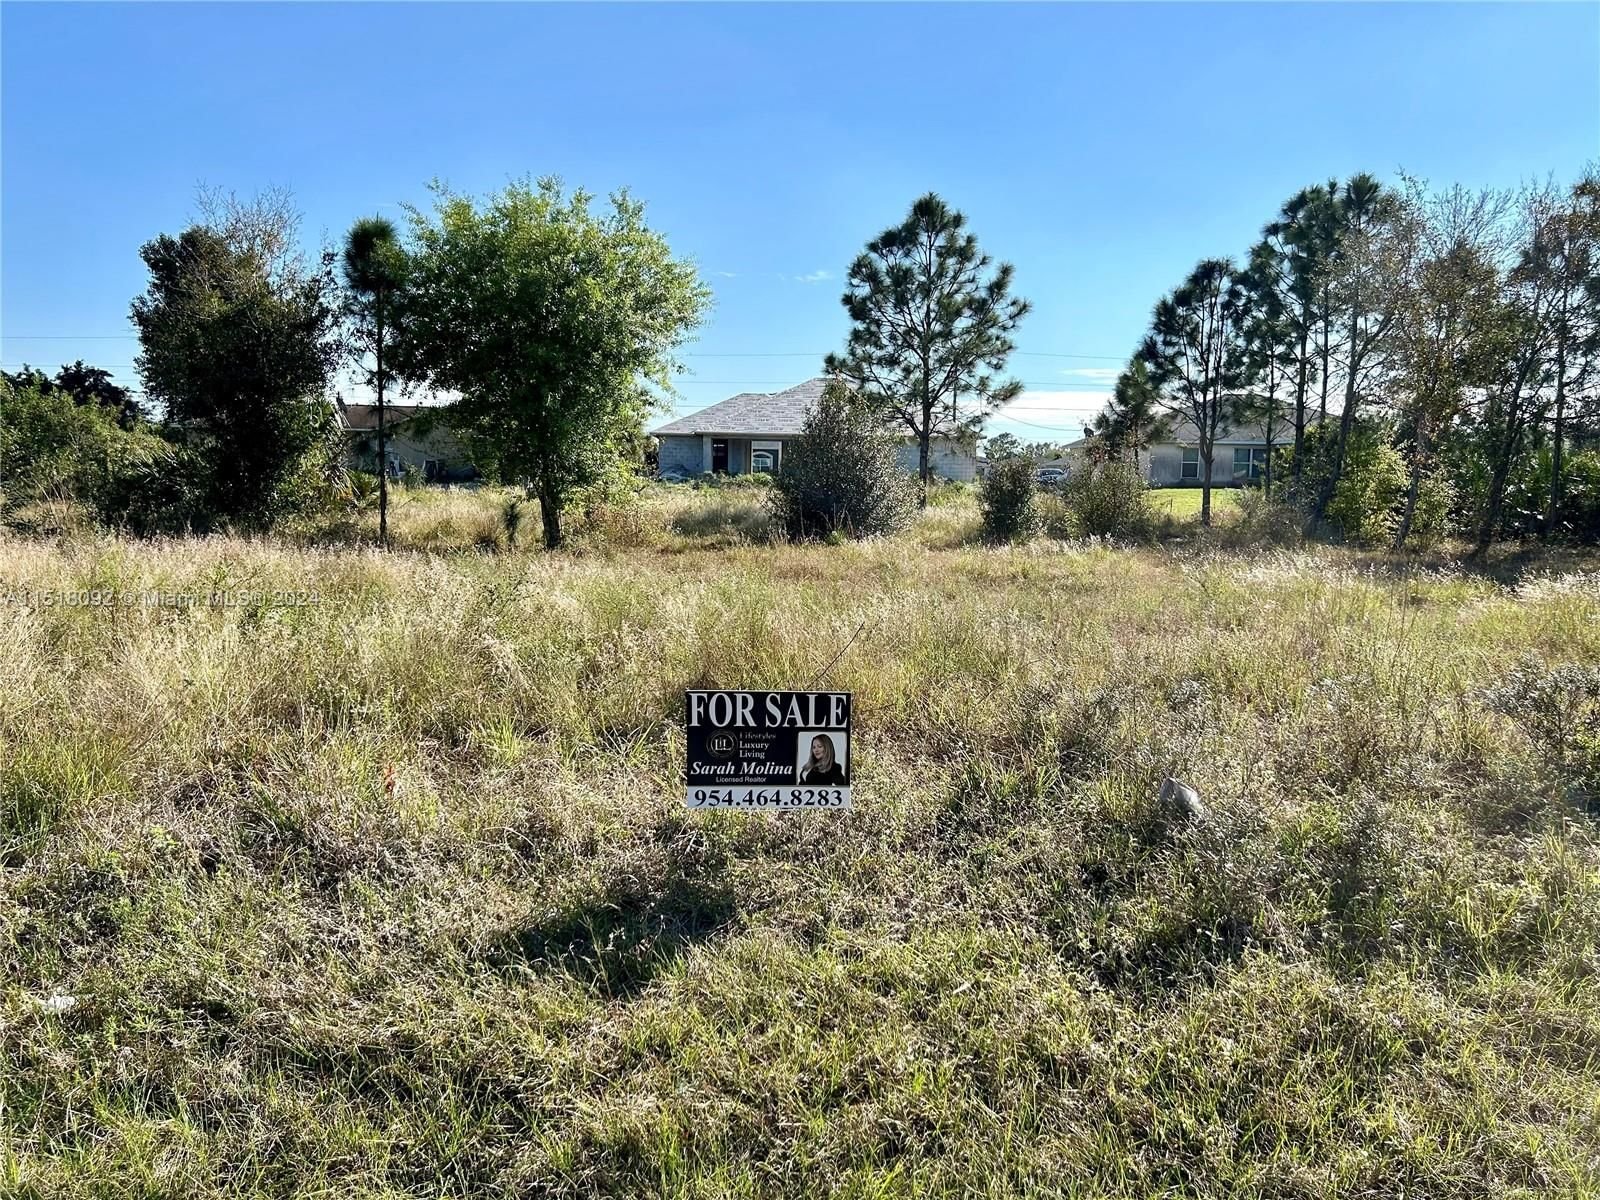 Real estate property located at 3907 8th St. SW, Lee County, Lehigh Acres, Lehigh Acres, FL